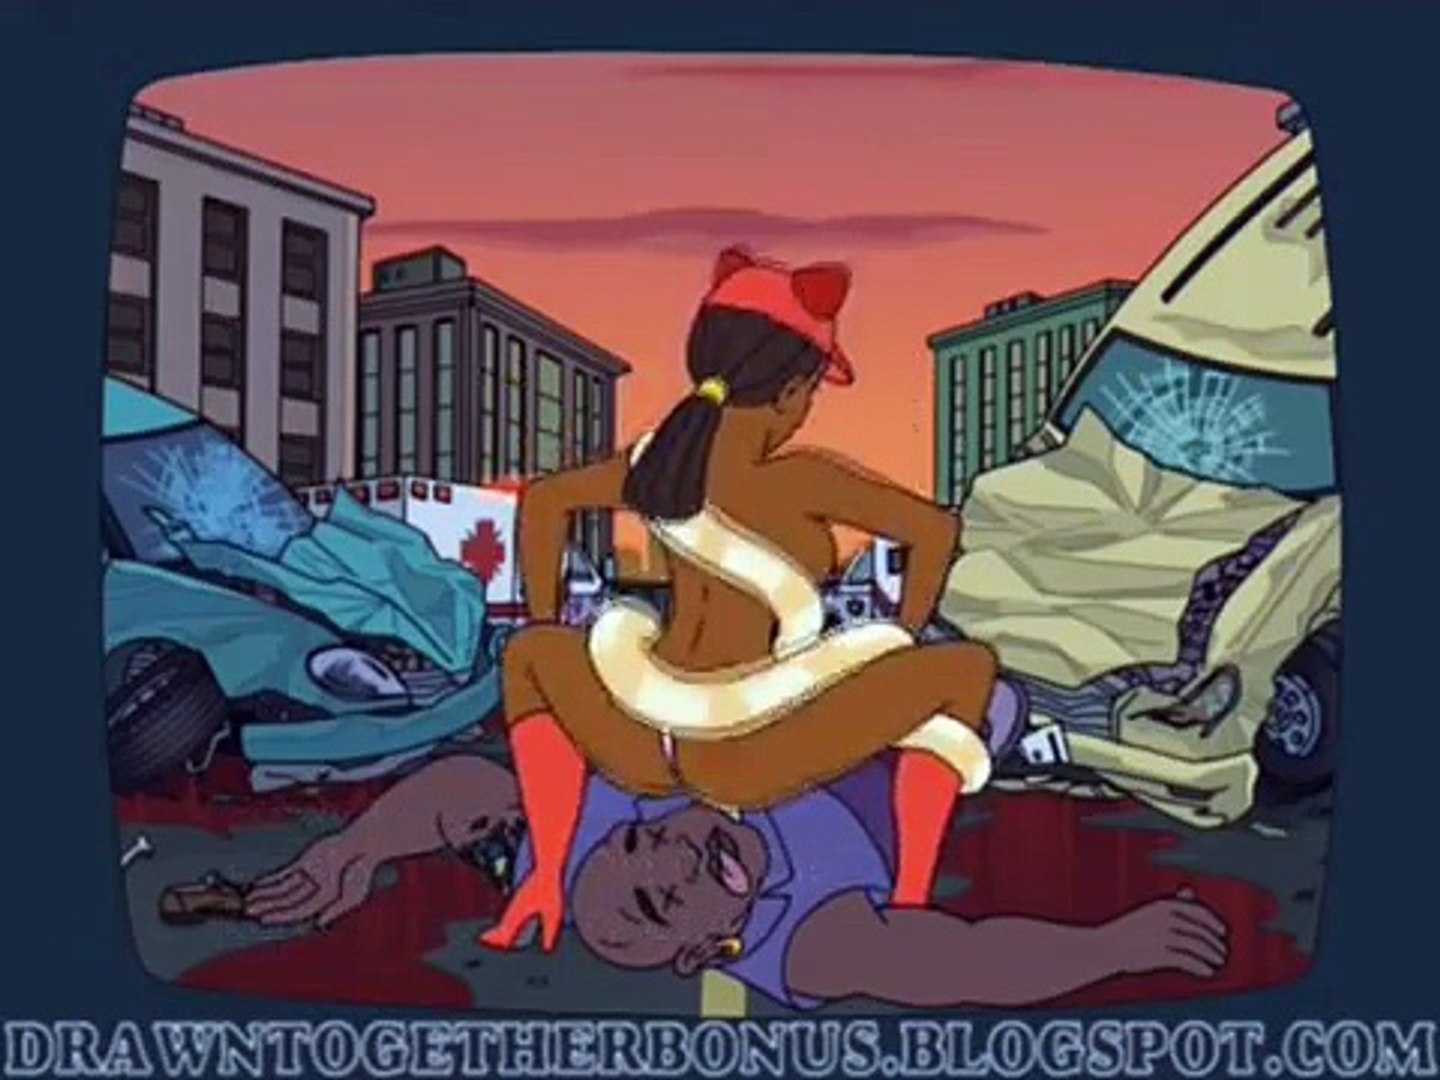 Drawn together nude scenes